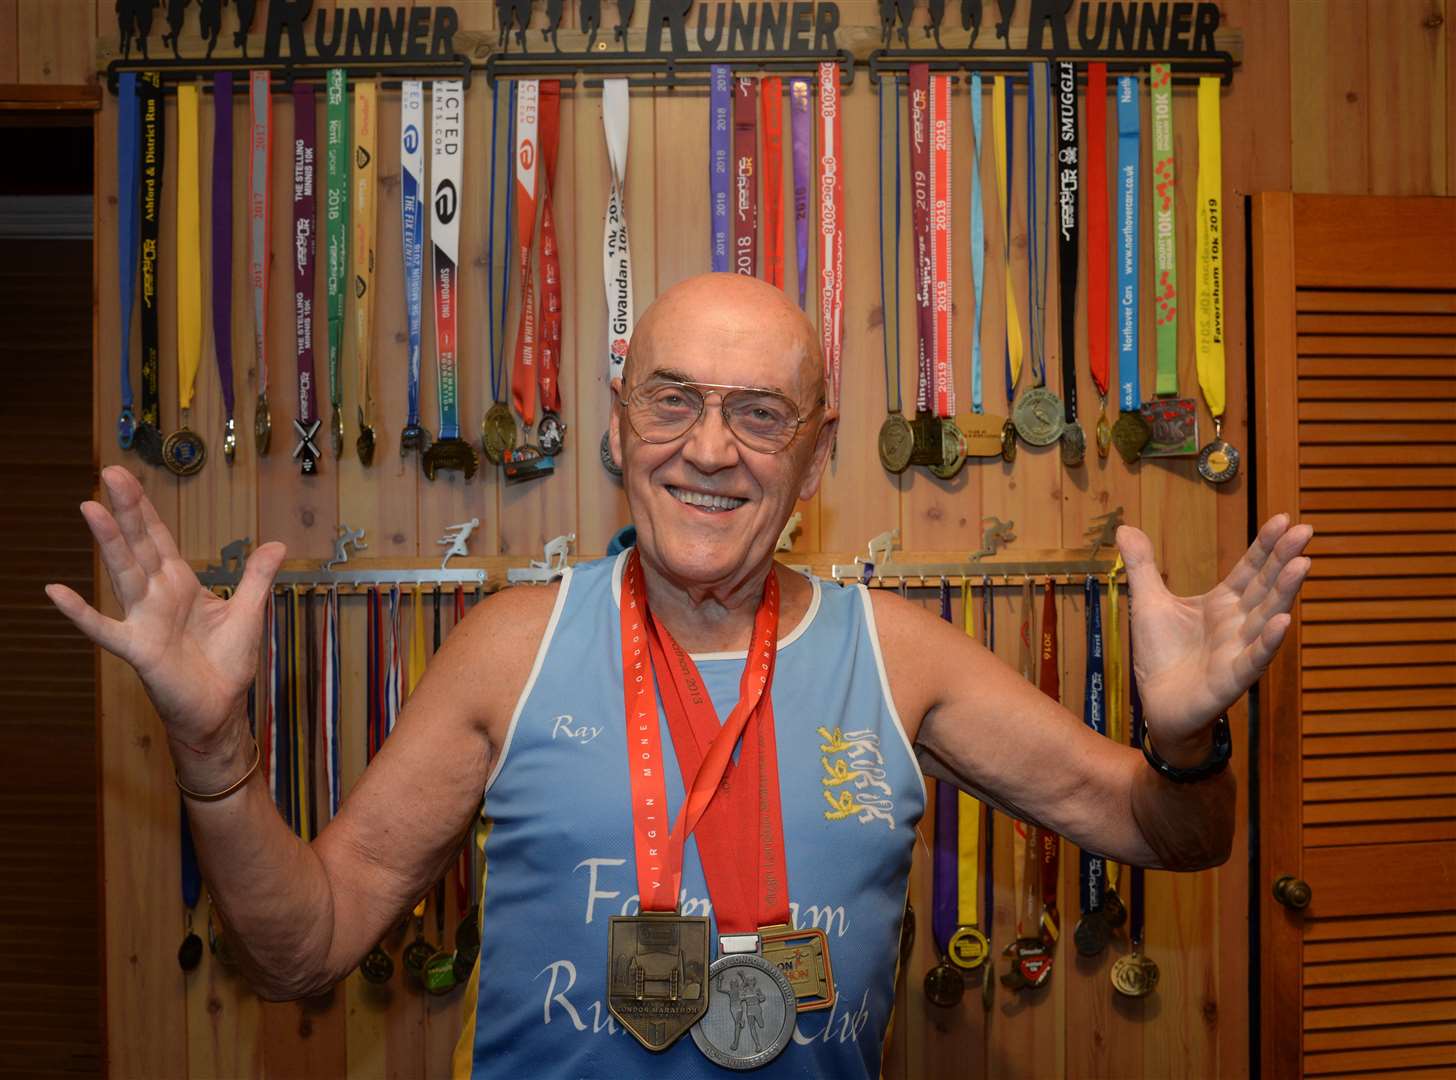 Marathon runner Ray Johnson, 82, with his medals